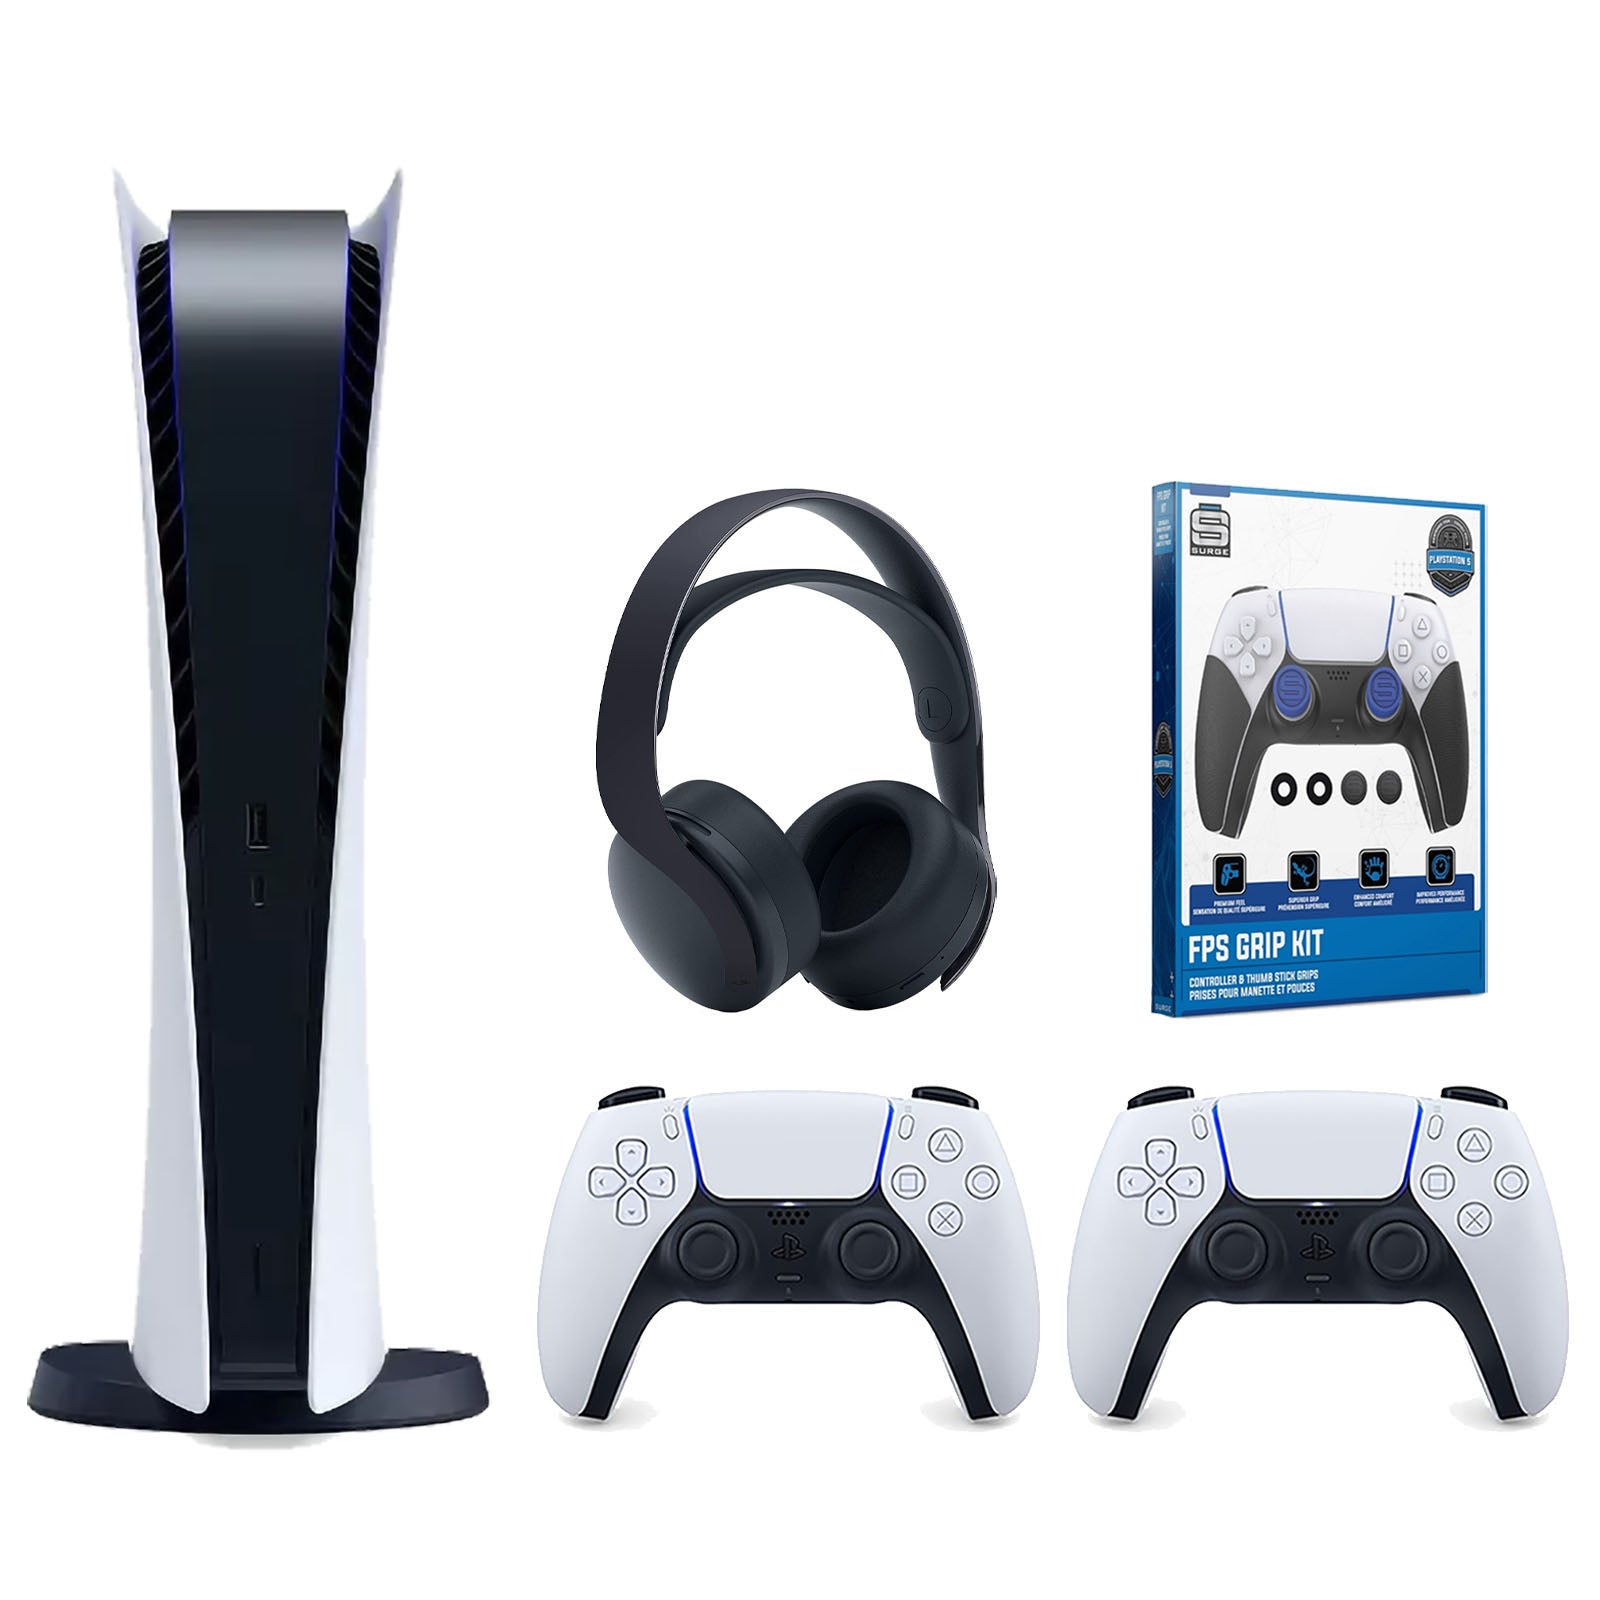 Sony Playstation 5 Digital Edition Console with Extra White Controller, Black PULSE 3D Headset and Surge FPS Grip Kit With Precision Aiming Rings Bundle - Pro-Distributing